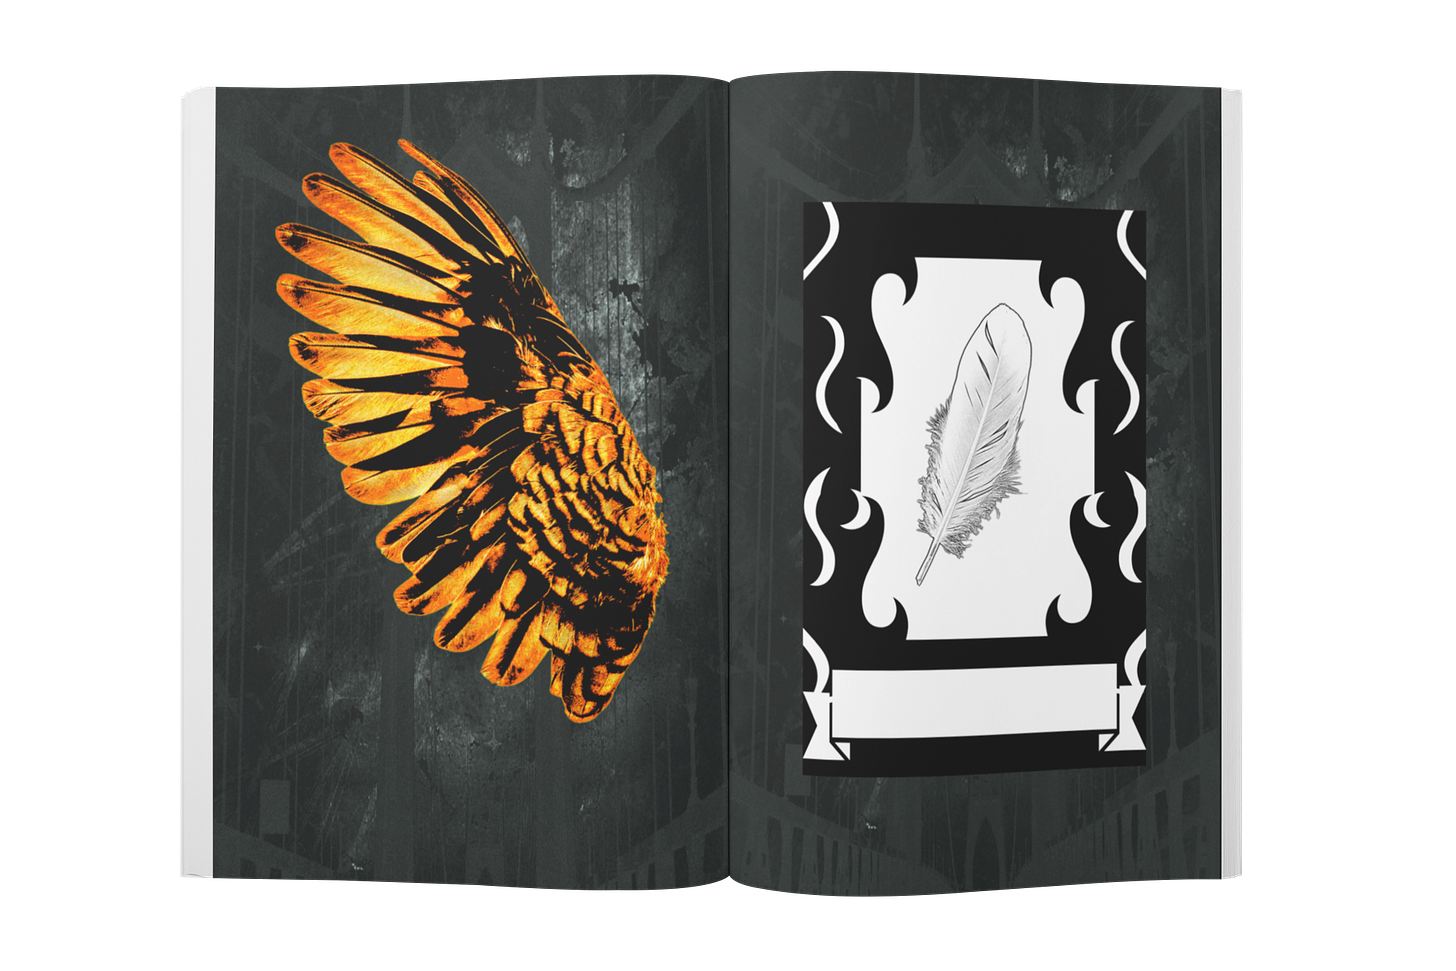 Golden angel wing interior cover art and angel feather bookplate for paperback Kickstarter special edition omnibuses